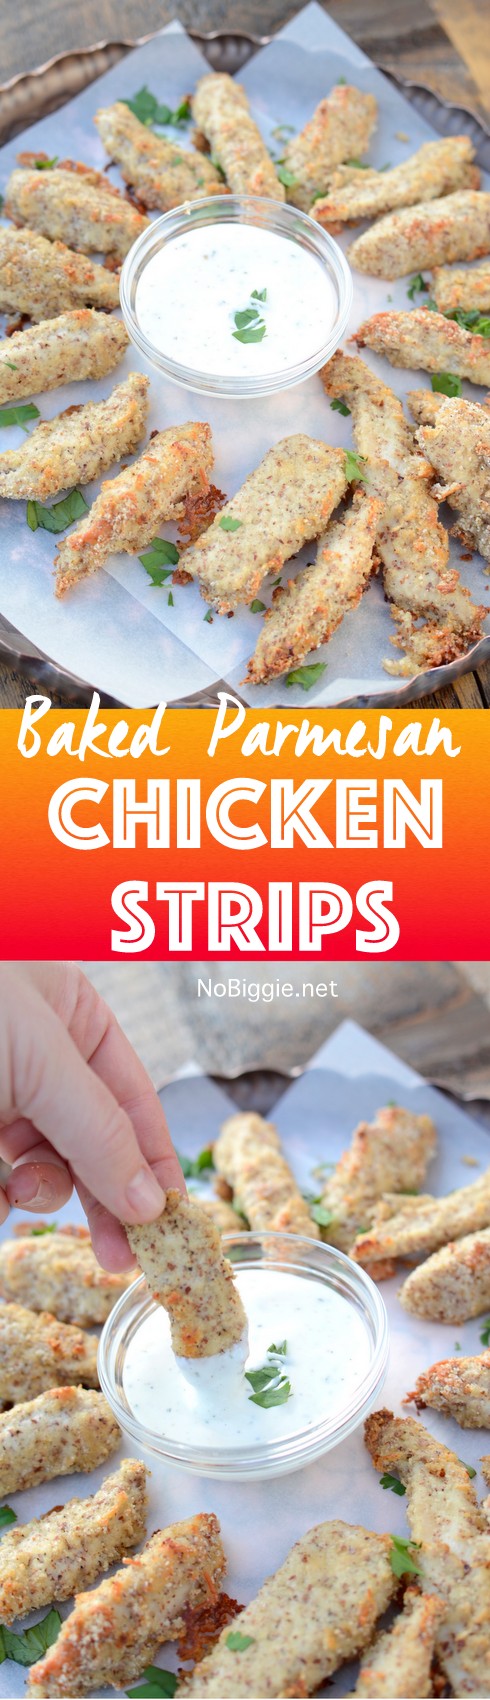 Baked Parmesan Chicken Strips - so crispy and delicious! | NoBiggie.net